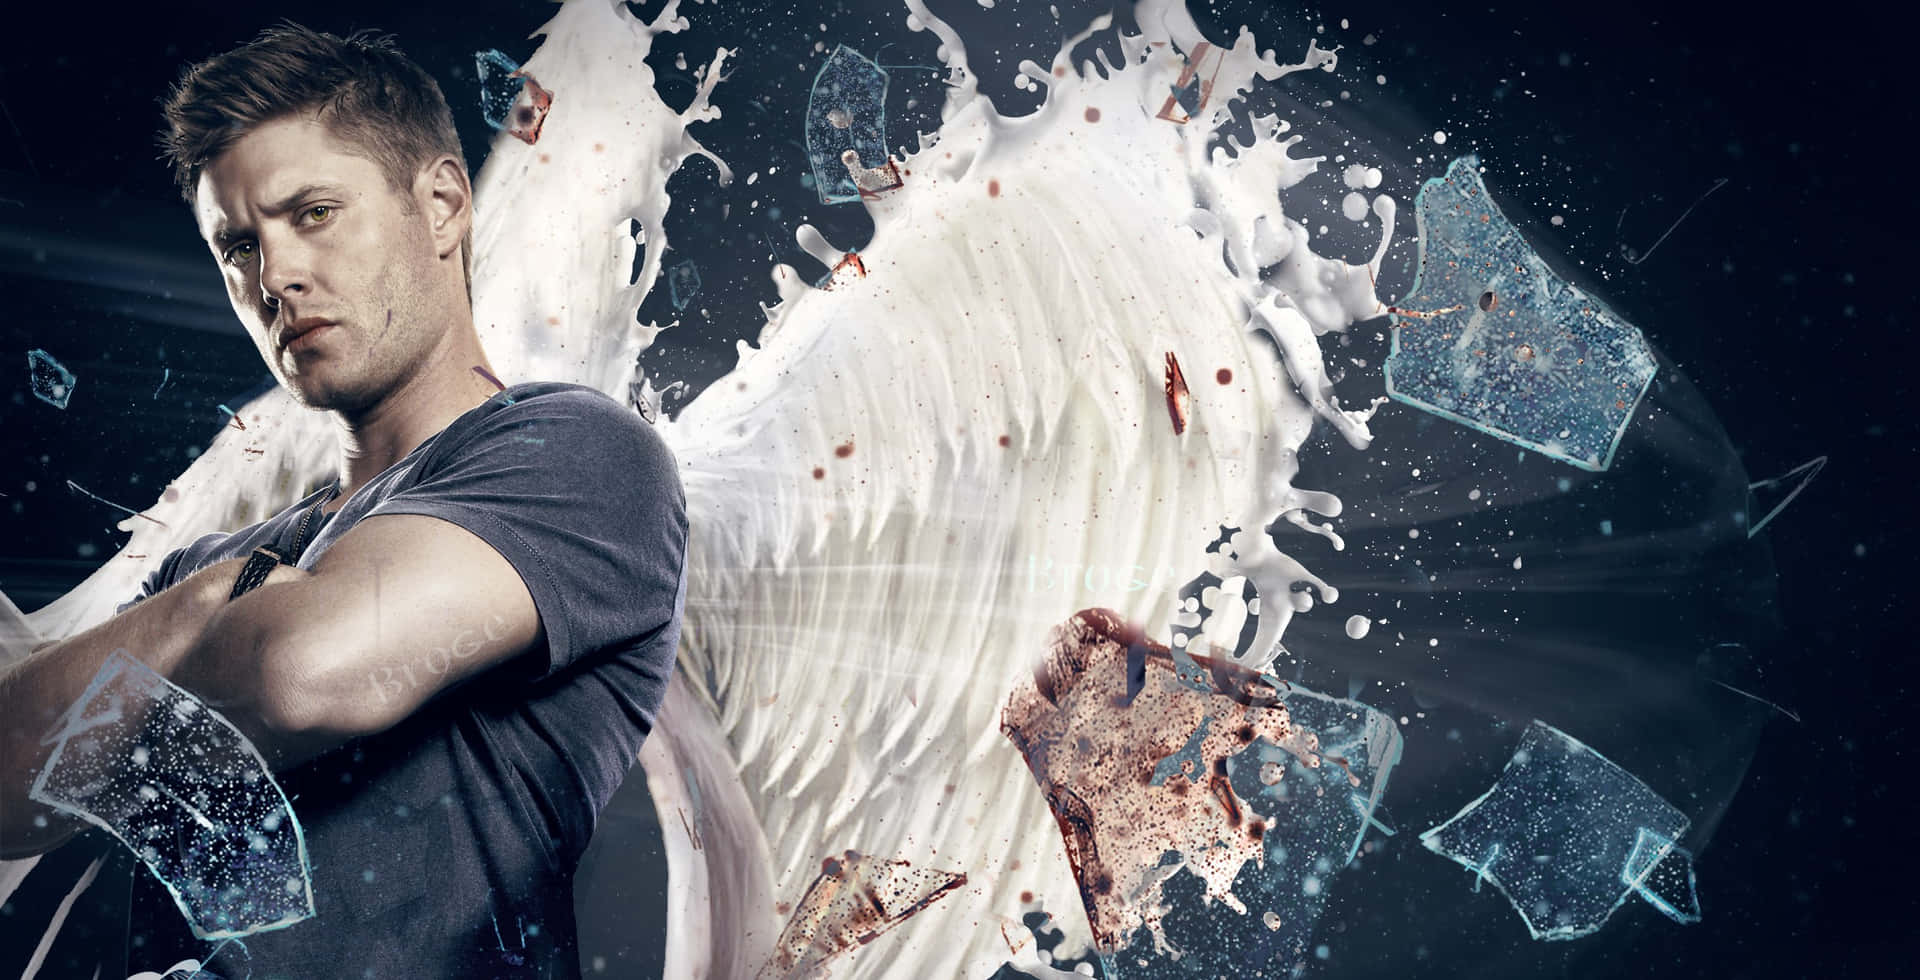 A Man With Wings Standing In Front Of A Broken Glass Wallpaper